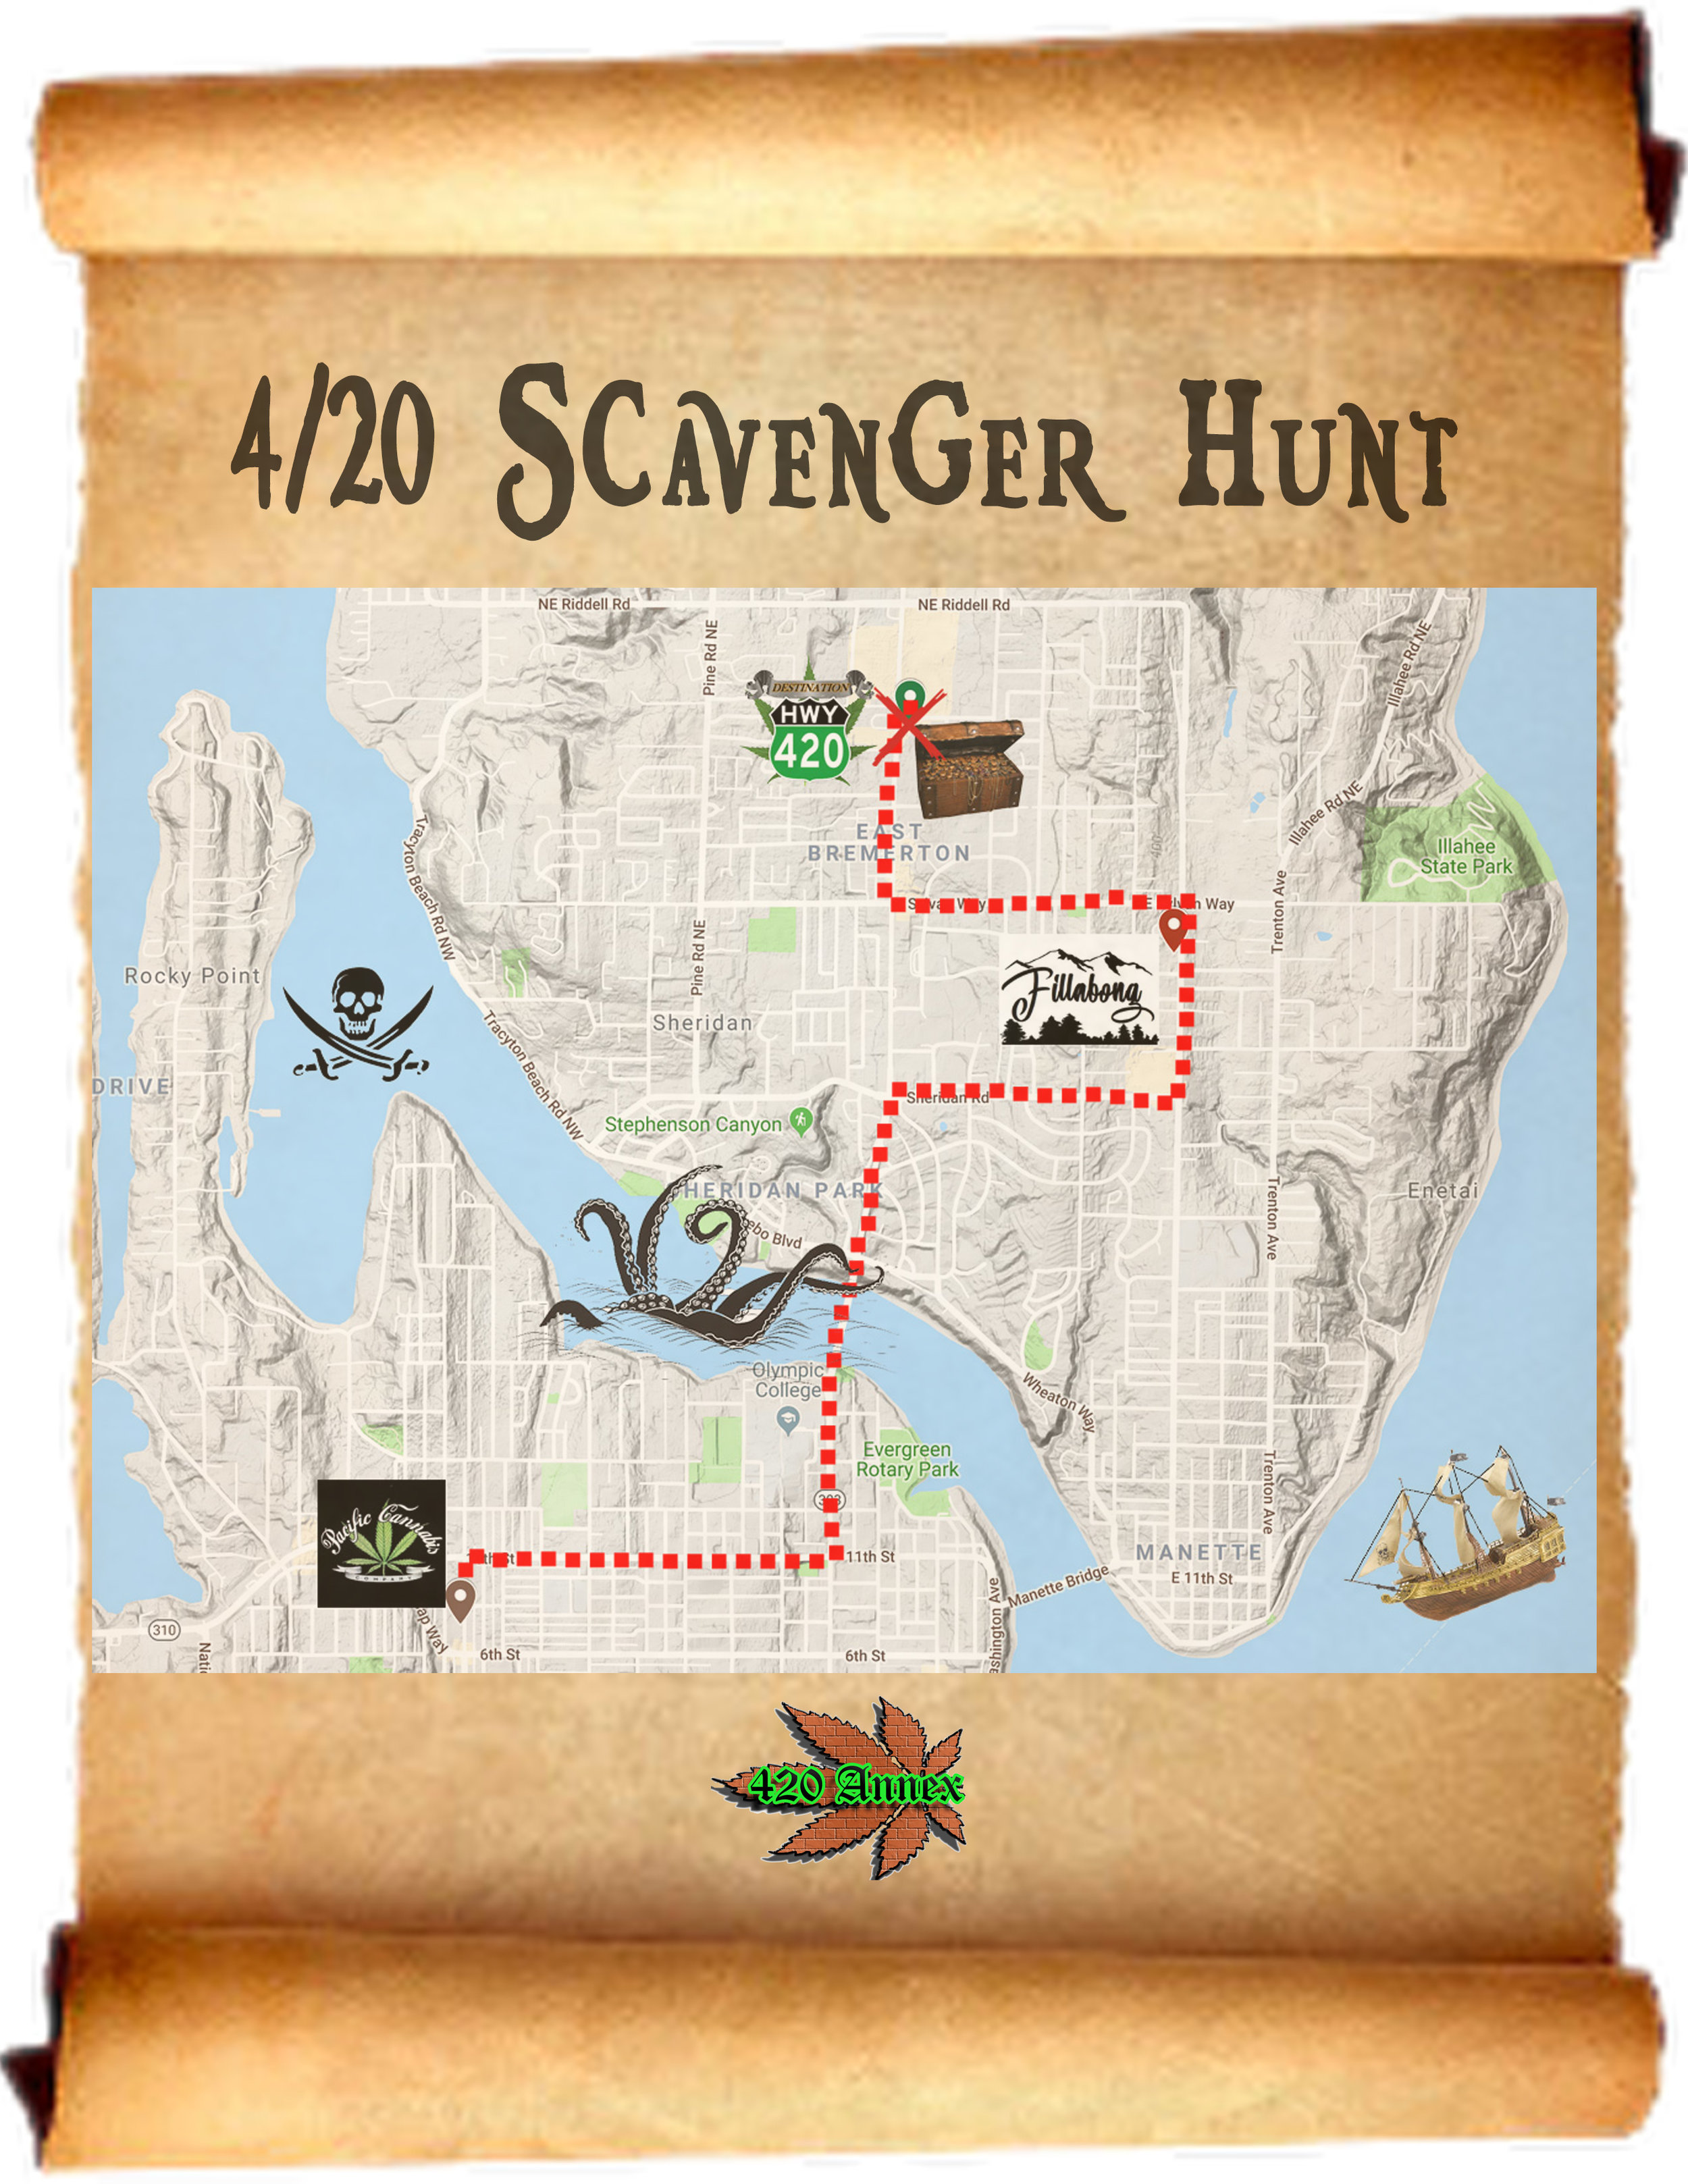 To participate in the Kitsap County 4/20 Scavenger Hunt, visit Filabong Bremerton, Pacific Cannabis Company, and Destination HWY 420, solve each stores’ riddle, and find their mystery items, to be eligible to win some badass 420 Annex gift baskets!